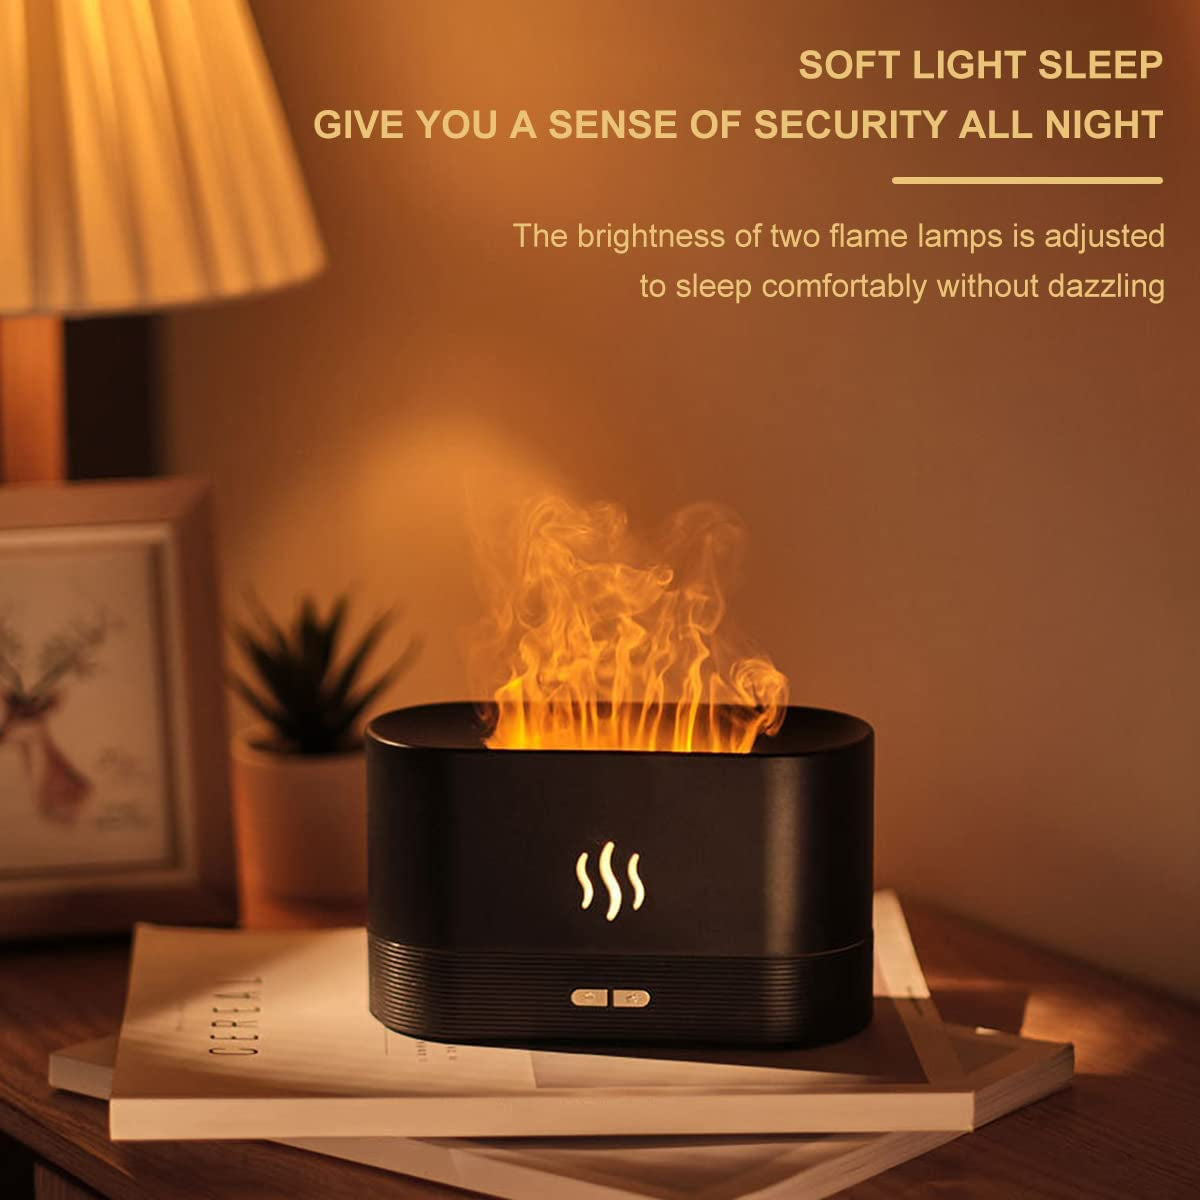 Essential Oil Diffuser with Flame，180Ml Aroma Diffuser with Flame Night Light USB Ultrasonic Mist Aromatherapy Essential Oil Diffuser，Suitable for Home Office, Bedroom, Automatic Closing (Black)